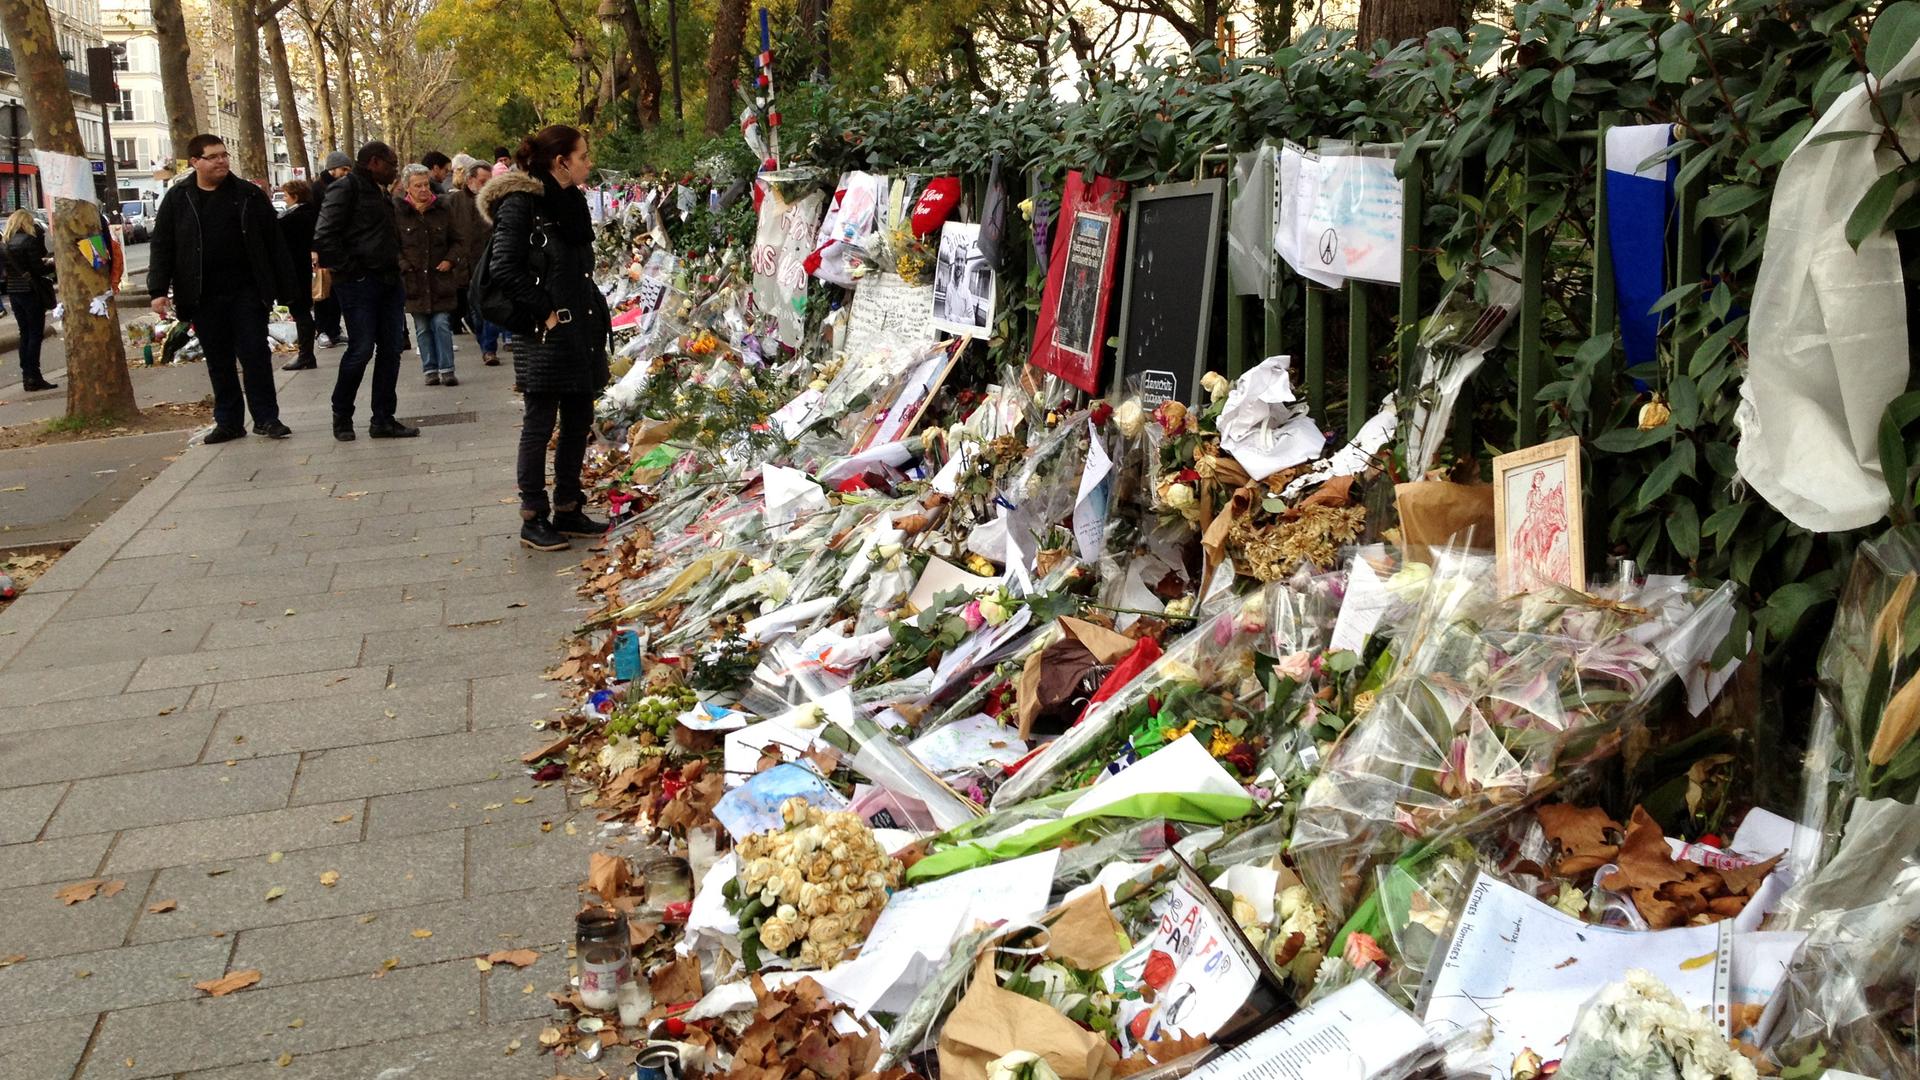 Parisians still flock to the Bataclan memorial site to remember those killed in the November 13 terror attacks.